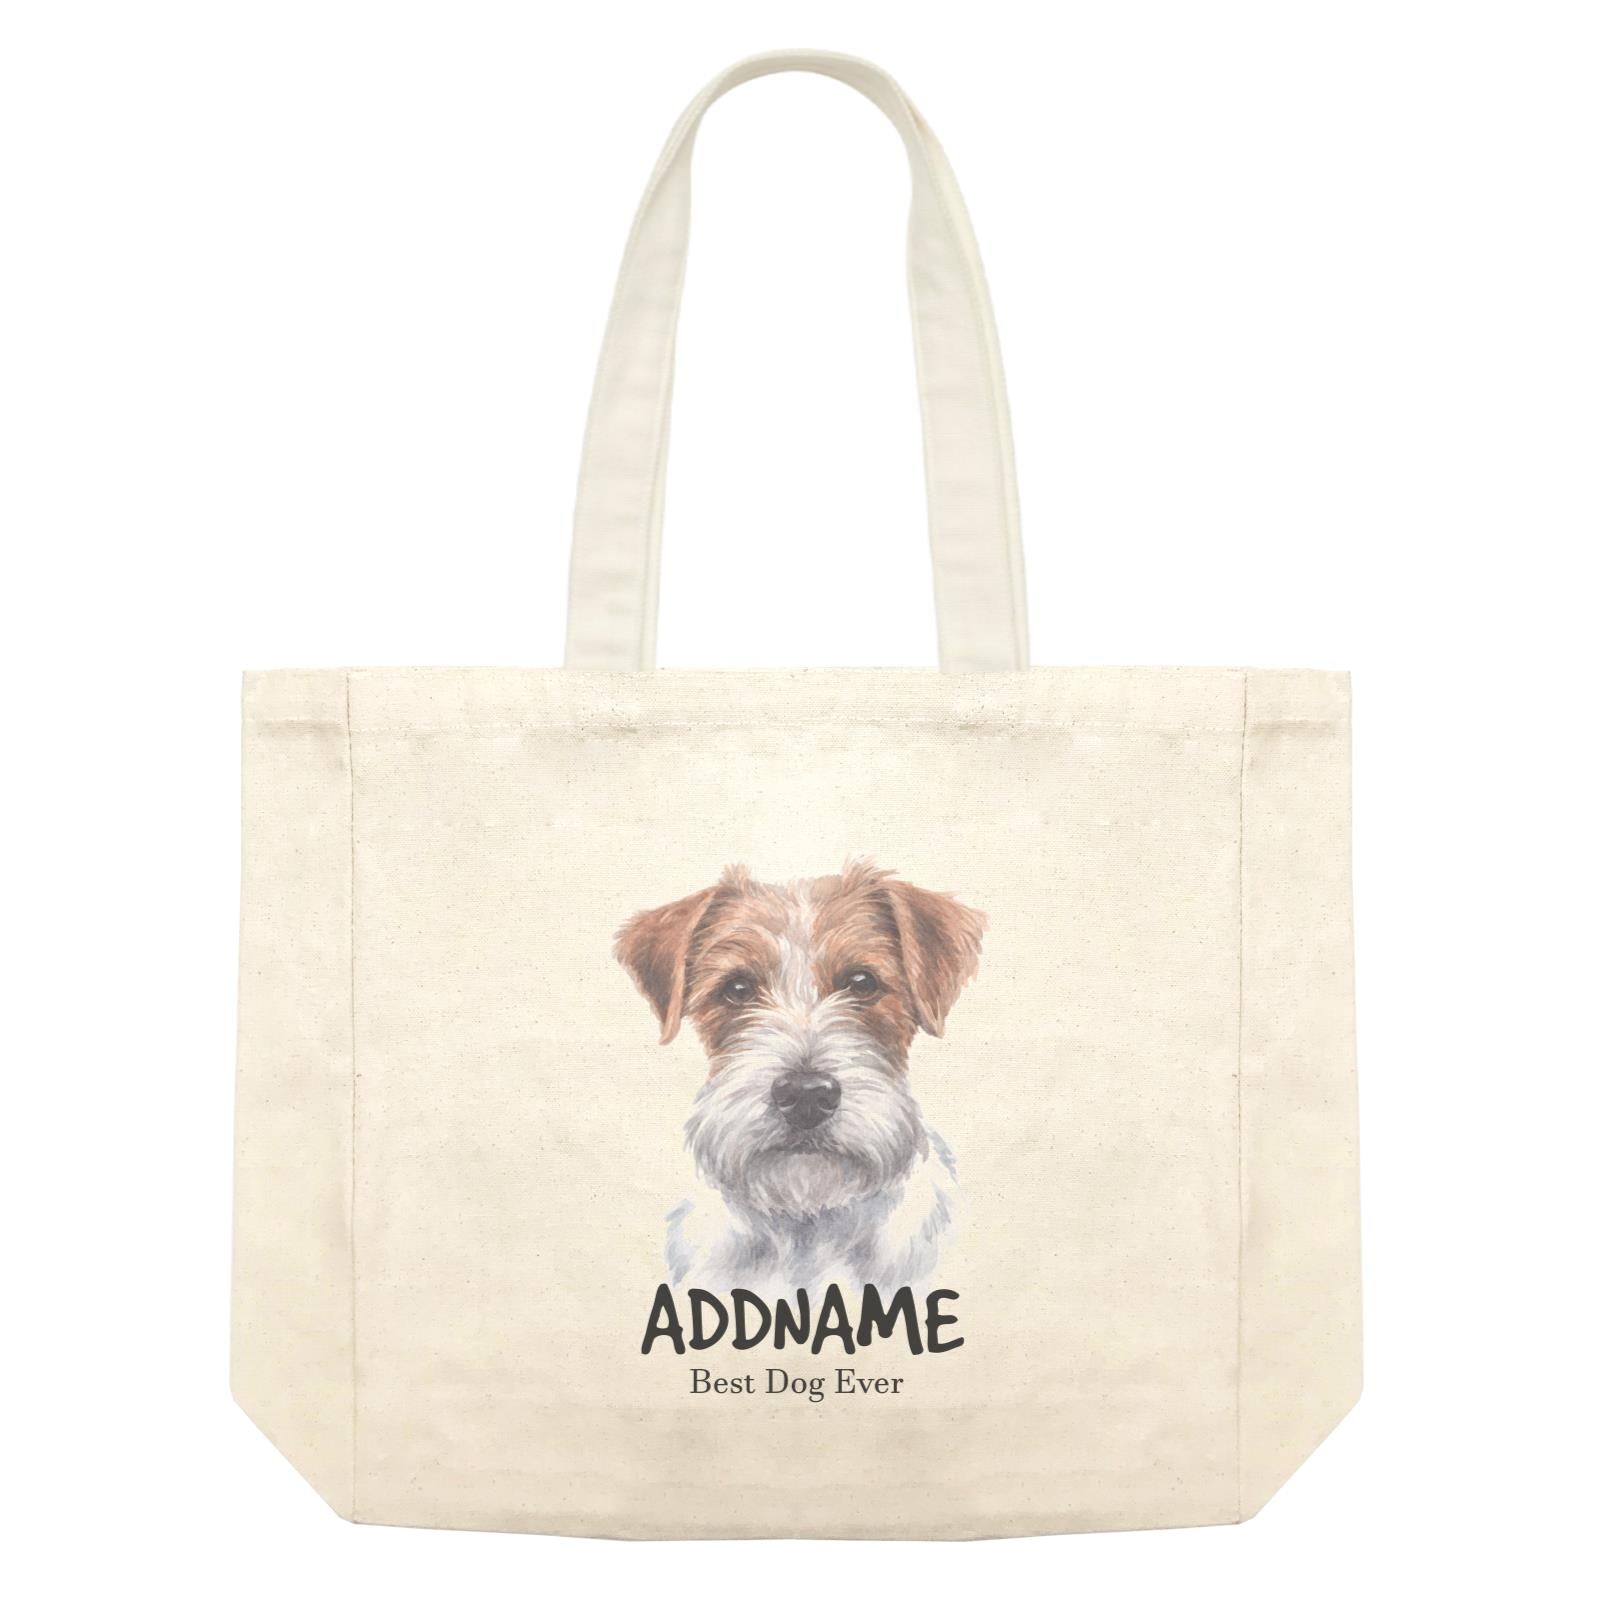 Watercolor Dog Jack Russell Hairy Best Dog Ever Addname Shopping Bag